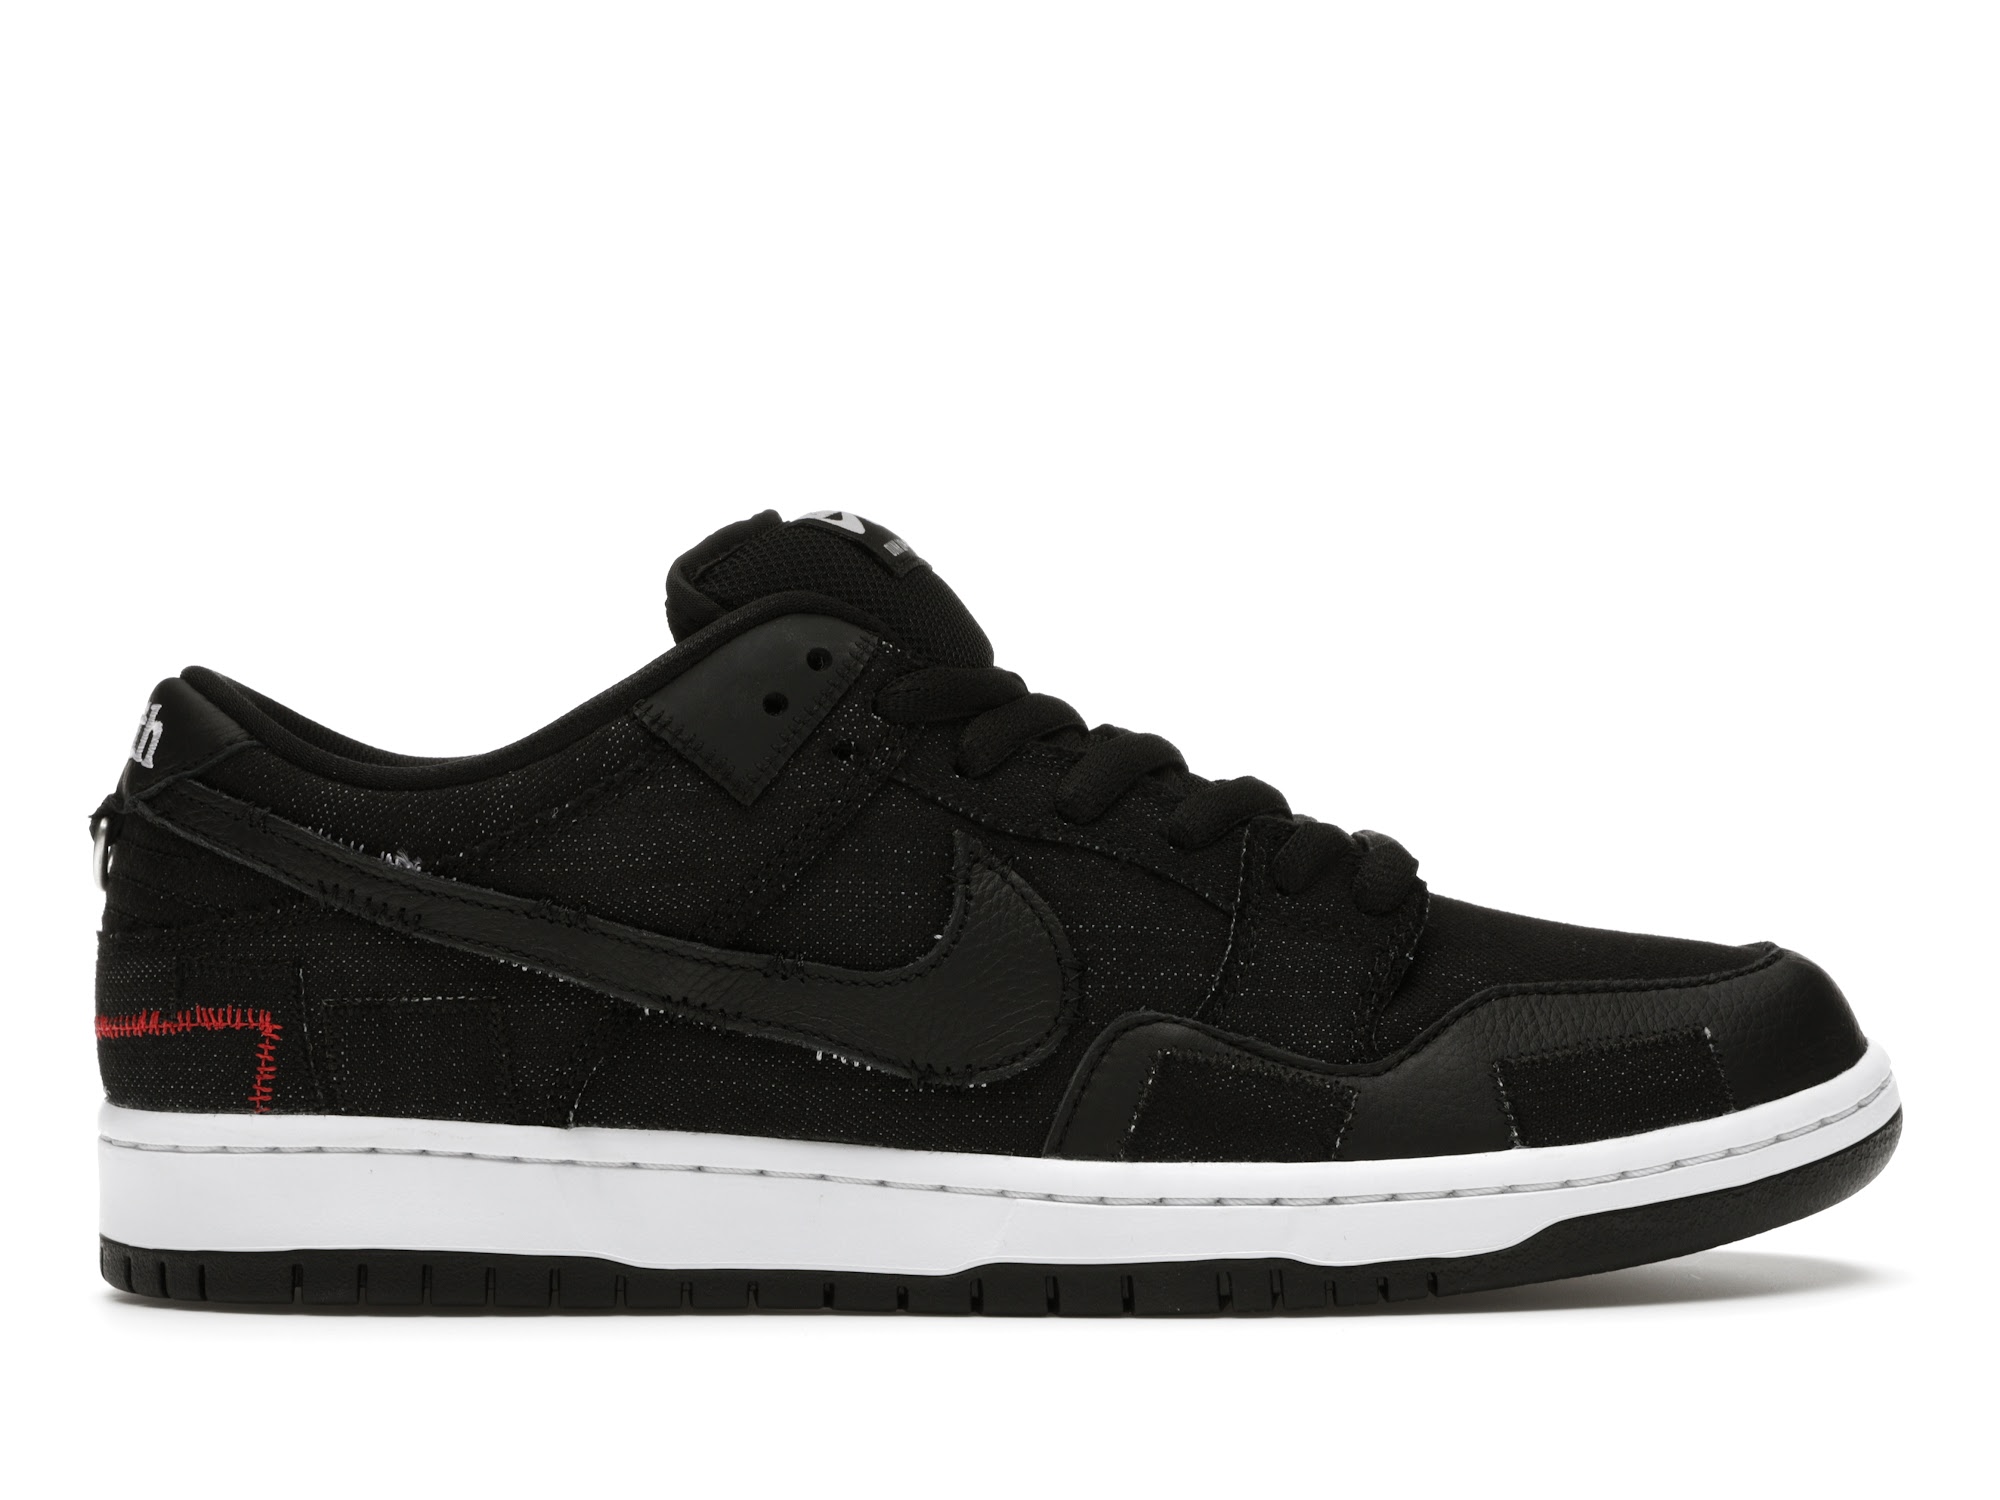 WASTED YOUTH × NIKE SB DUNK LOW